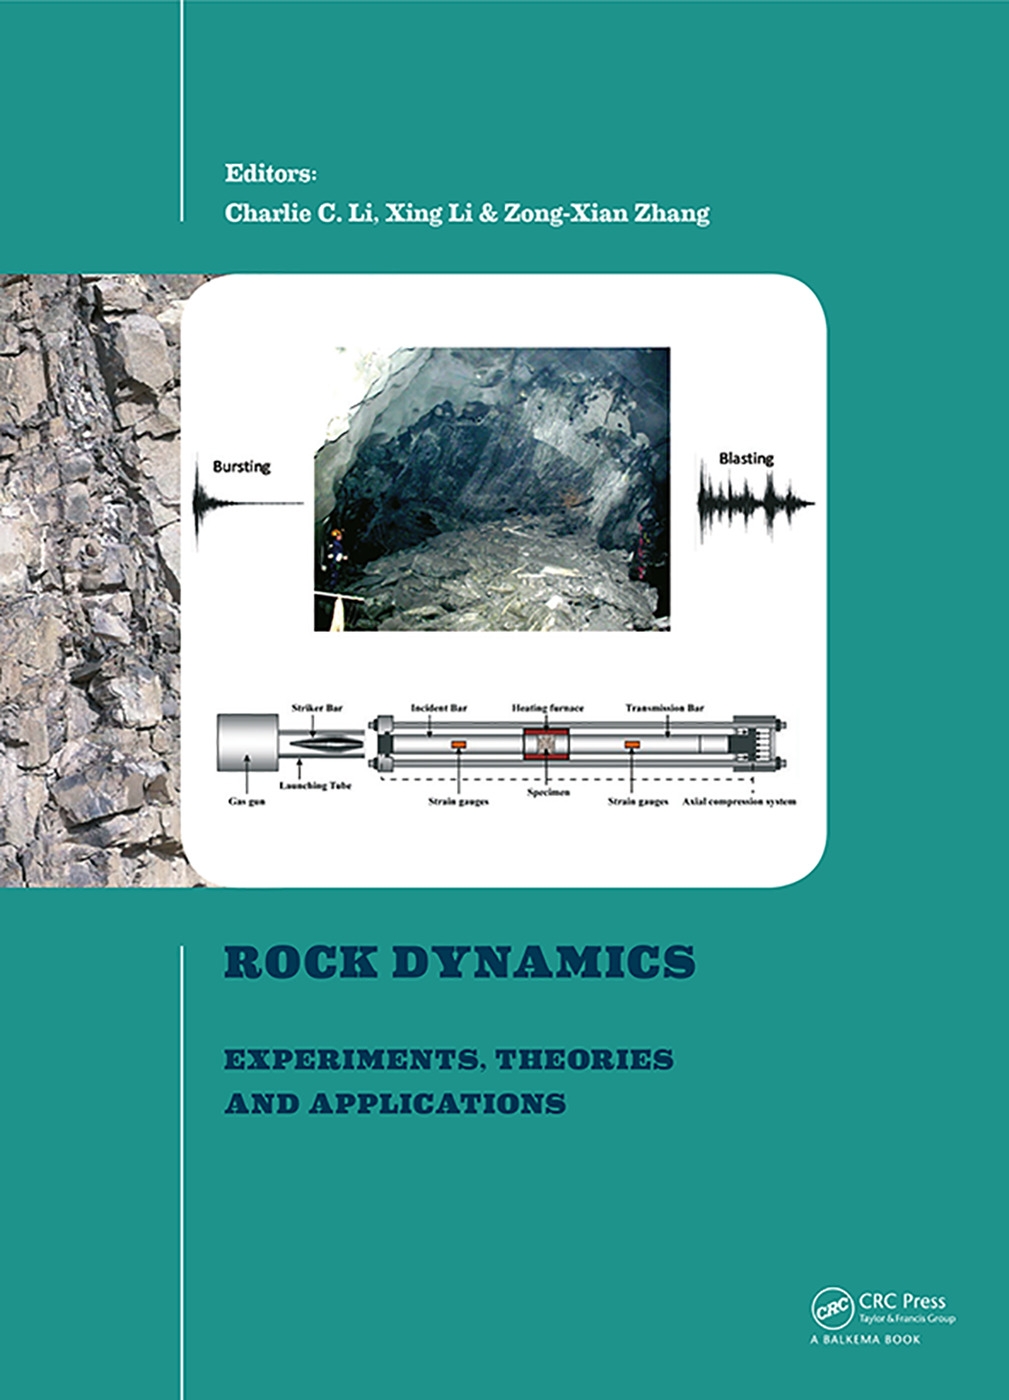 Rock Dynamics - Experiments, Theories and Applications: Proceedings of the 3rd International Confrence on Rock Dynamics and Appl